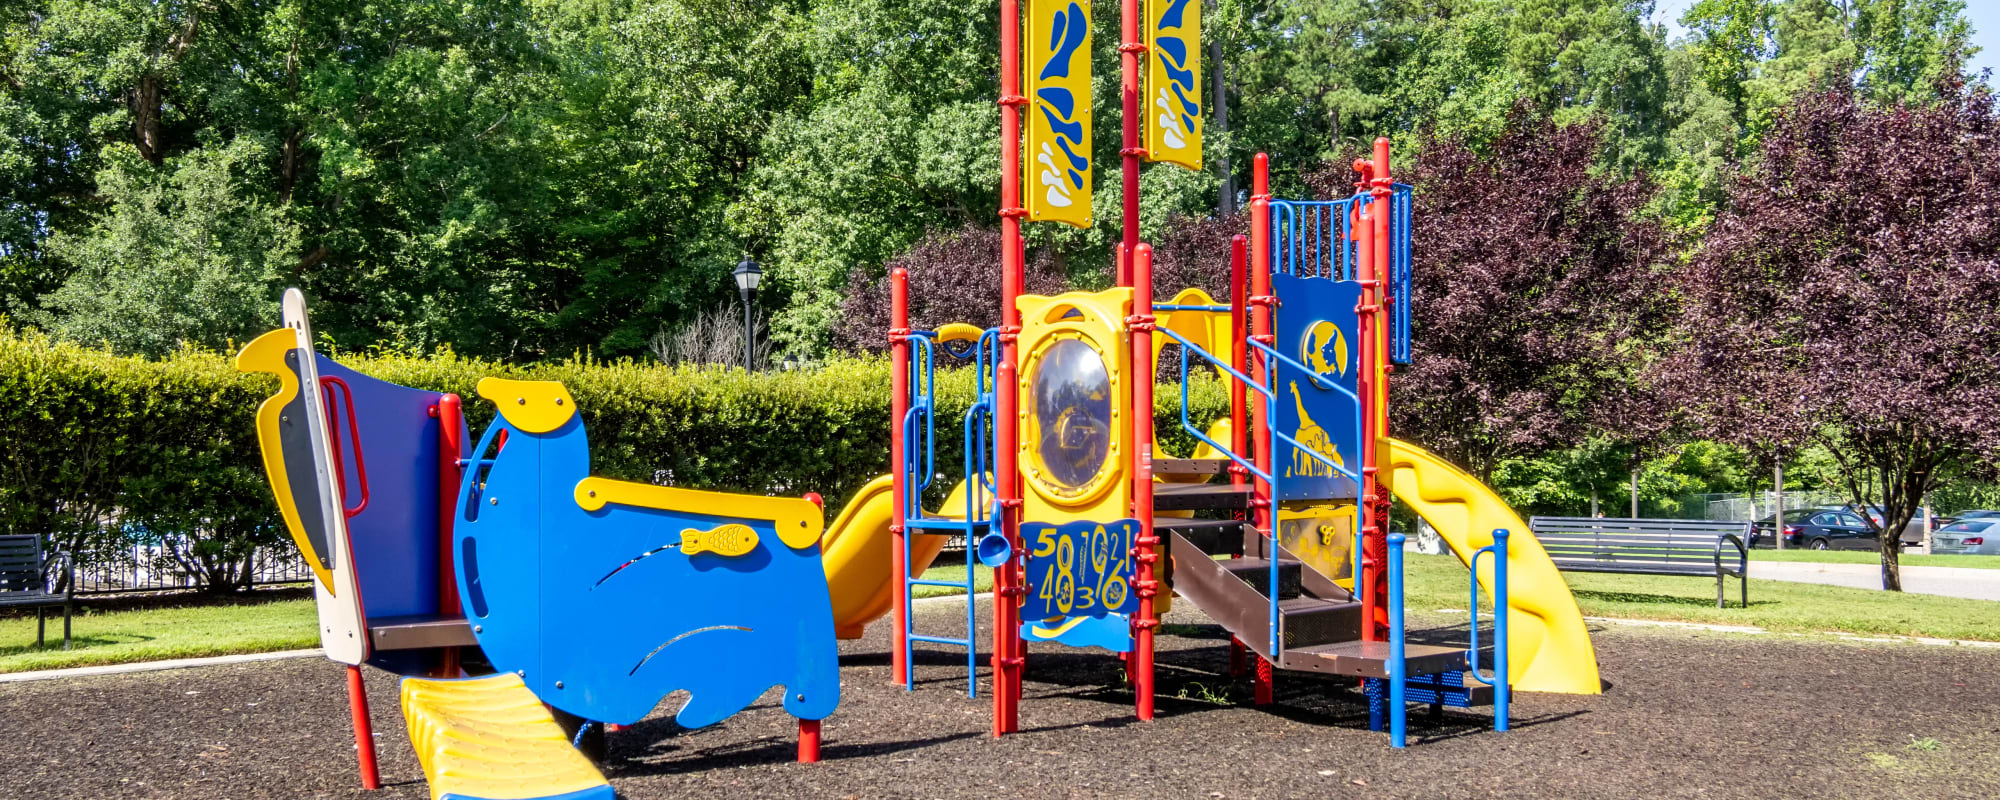 A playground at Covenant Trace in Newport News, Virginia